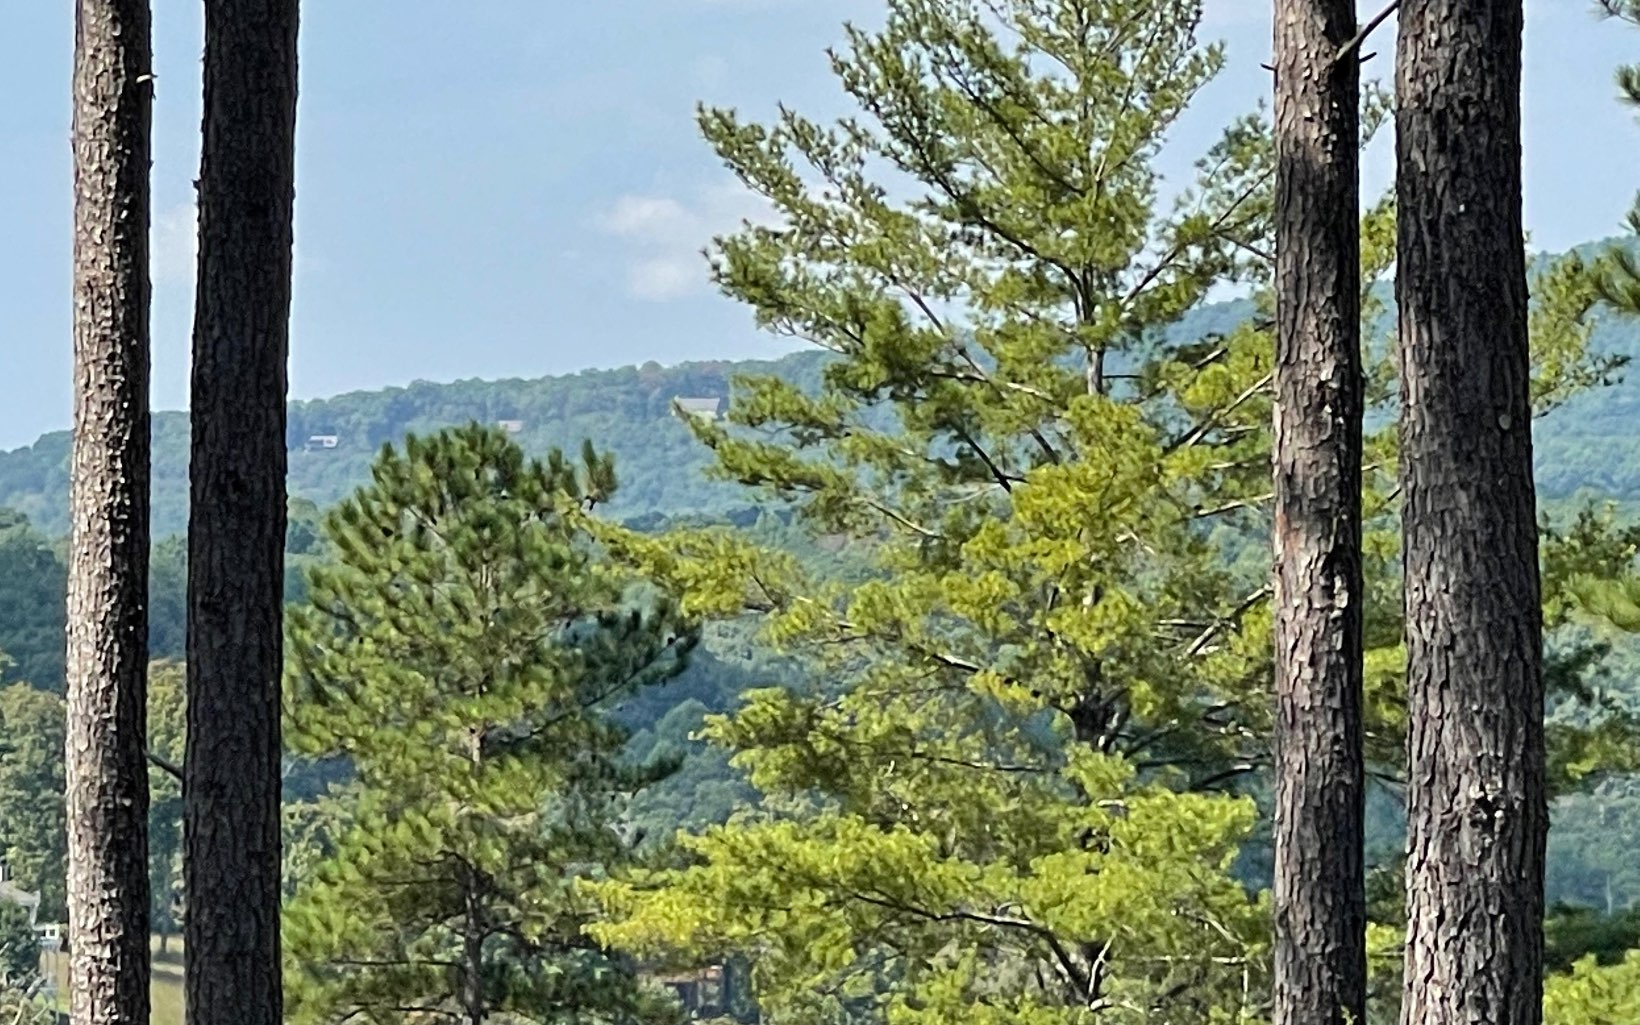 BEAUTIFULLY WOODED 2+ ACRE LOT IN GATED UPSCALE NORTH GEORGIA MOUNTAIN COMMUNITY!! 2.15 Acres in the upscale Thirteen Hundred subdivision. Wooded lot at the end of a cul-de-sac with lake access. Seasonal mountain views and paved roads on gentle terrain. Lots of amenities in this subdivision that is close to town. Boat slips, lake access, community pool, gated entrance, and clubhouse, make this an awesome place to build your dream home!